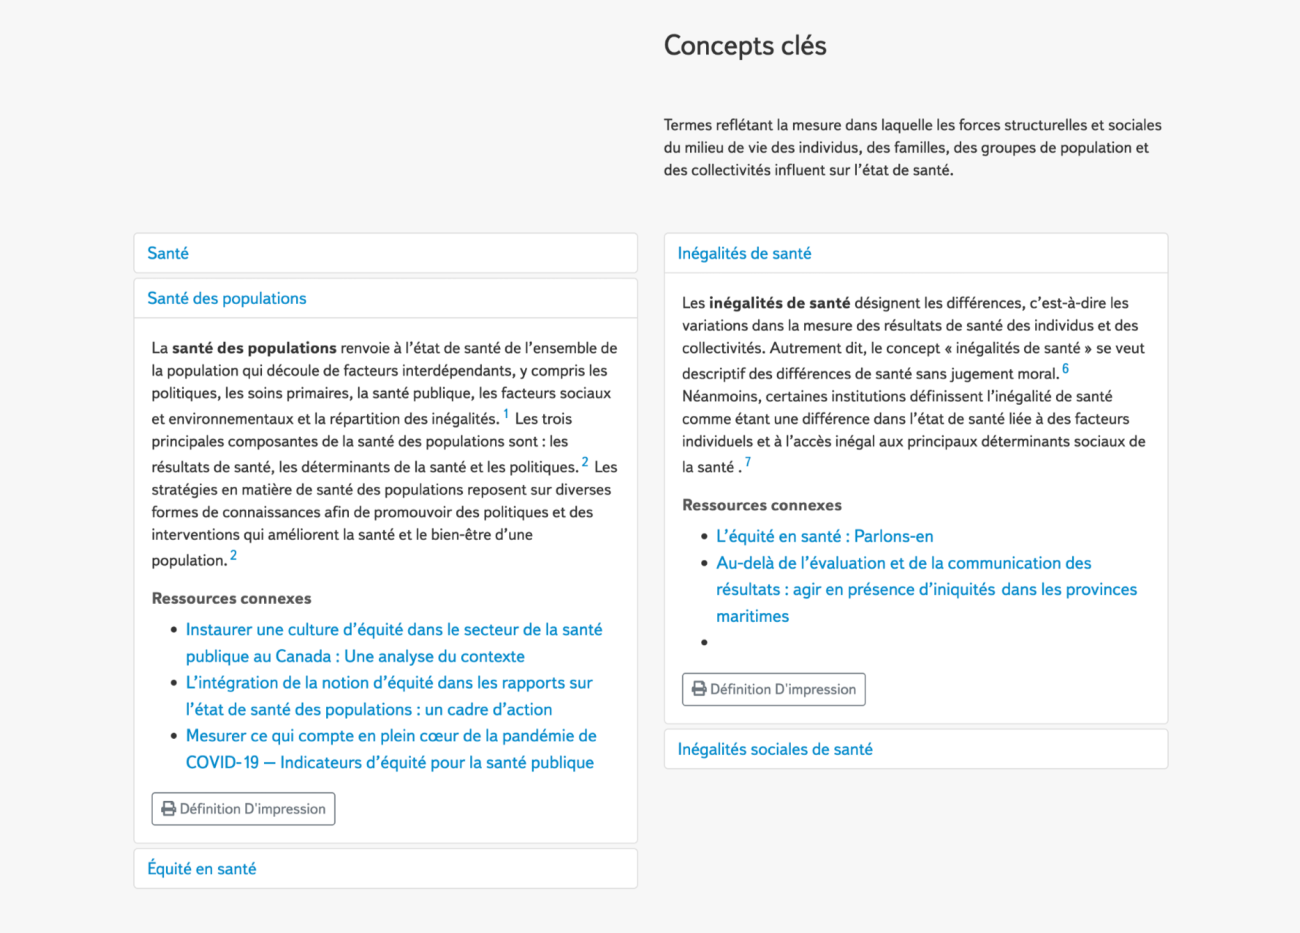 Screenshot of the NCCDH Glossary of Essential Health Equity Terms in French